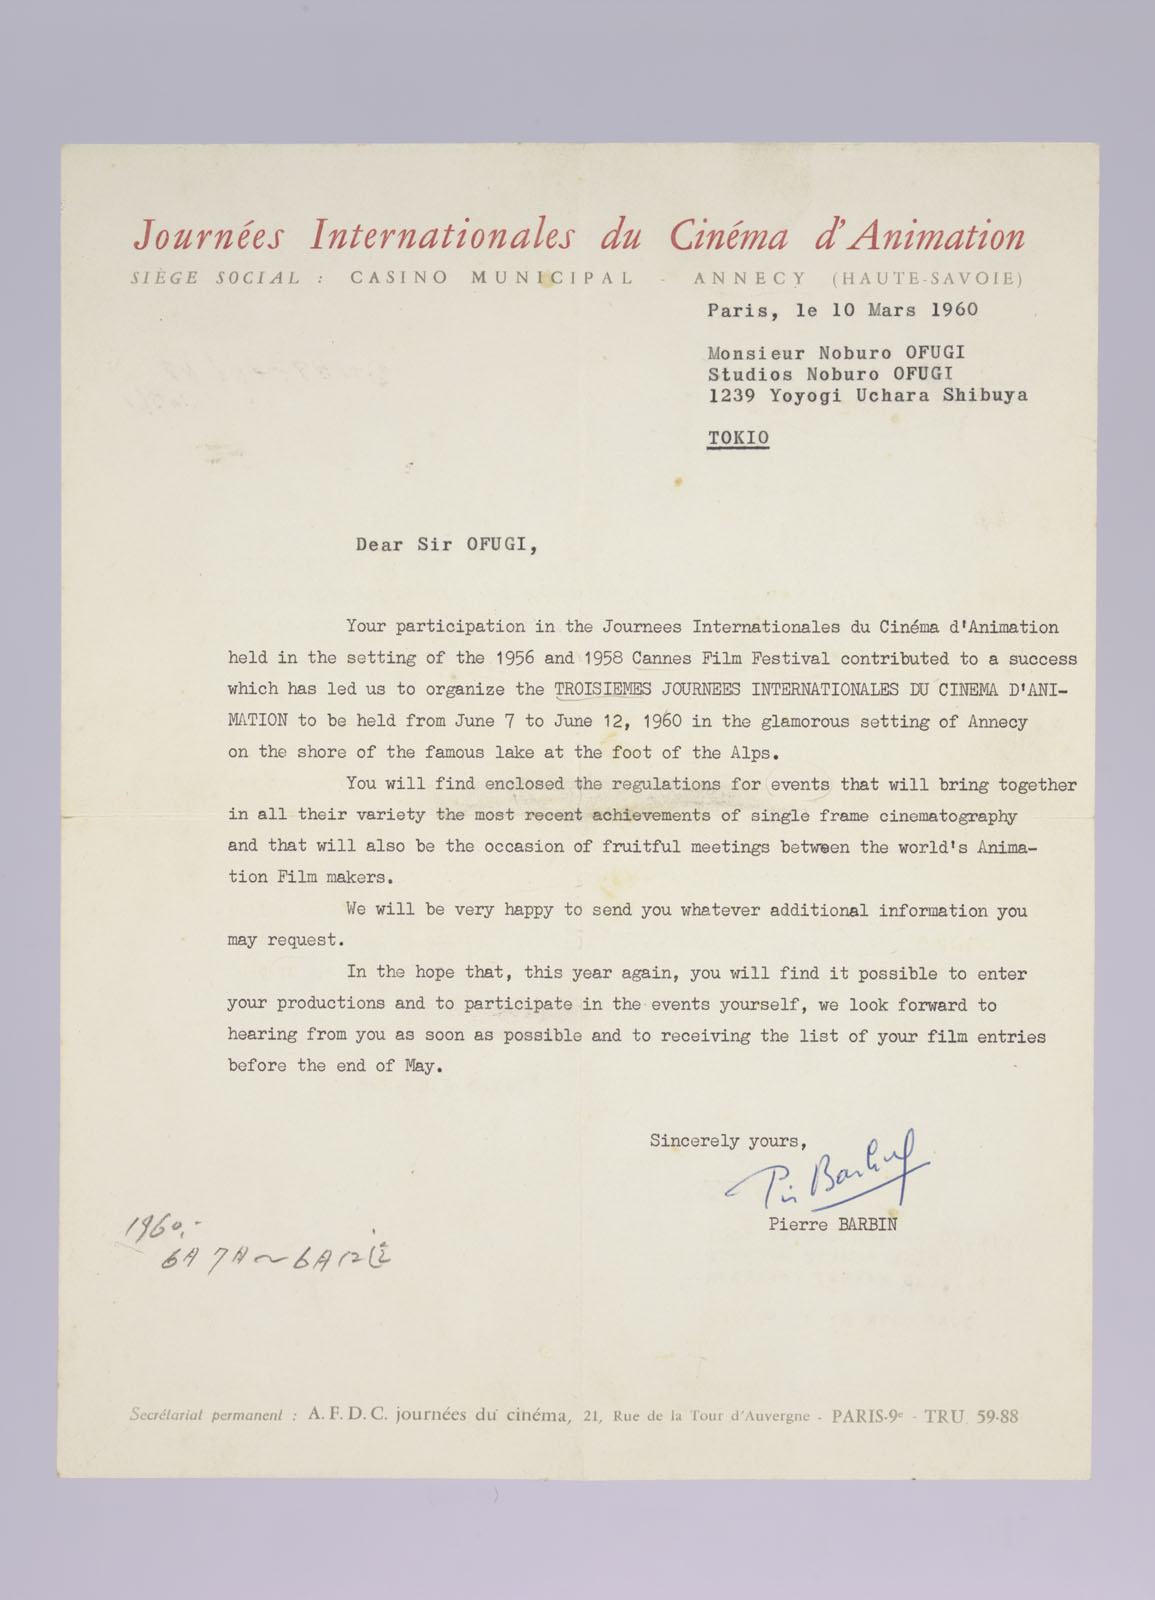 A letter of invitation to the Annecy International Animation Festival (1960)